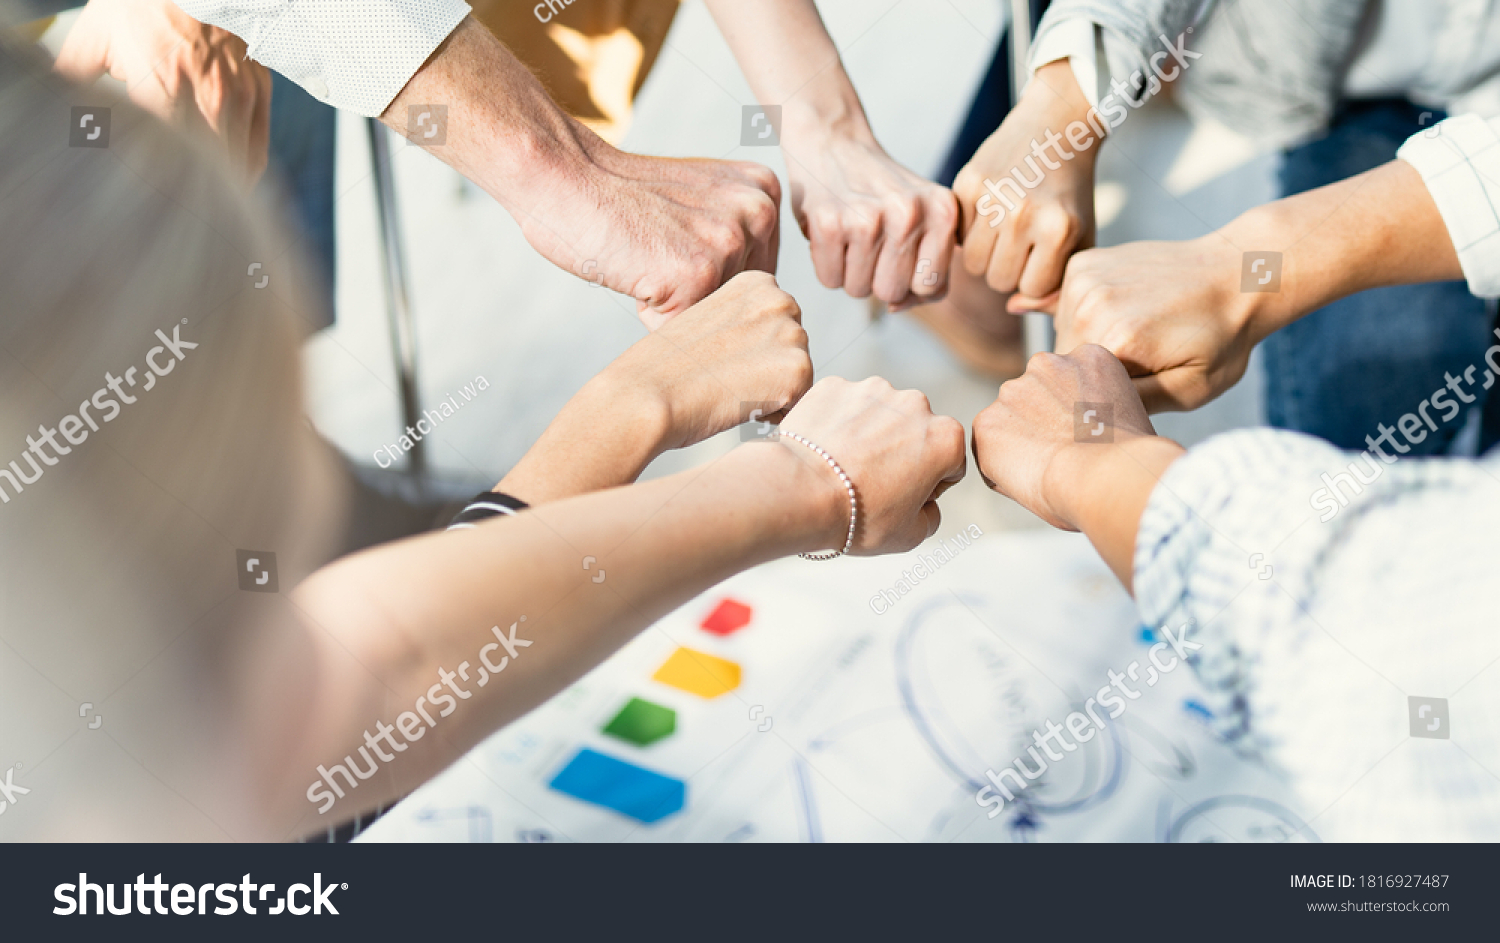 Hand for work together concept, Hand stack for business and service, Volunteer or teamwork togetherness, Concept connection of community and charity. Group of happy people or team participation. #1816927487